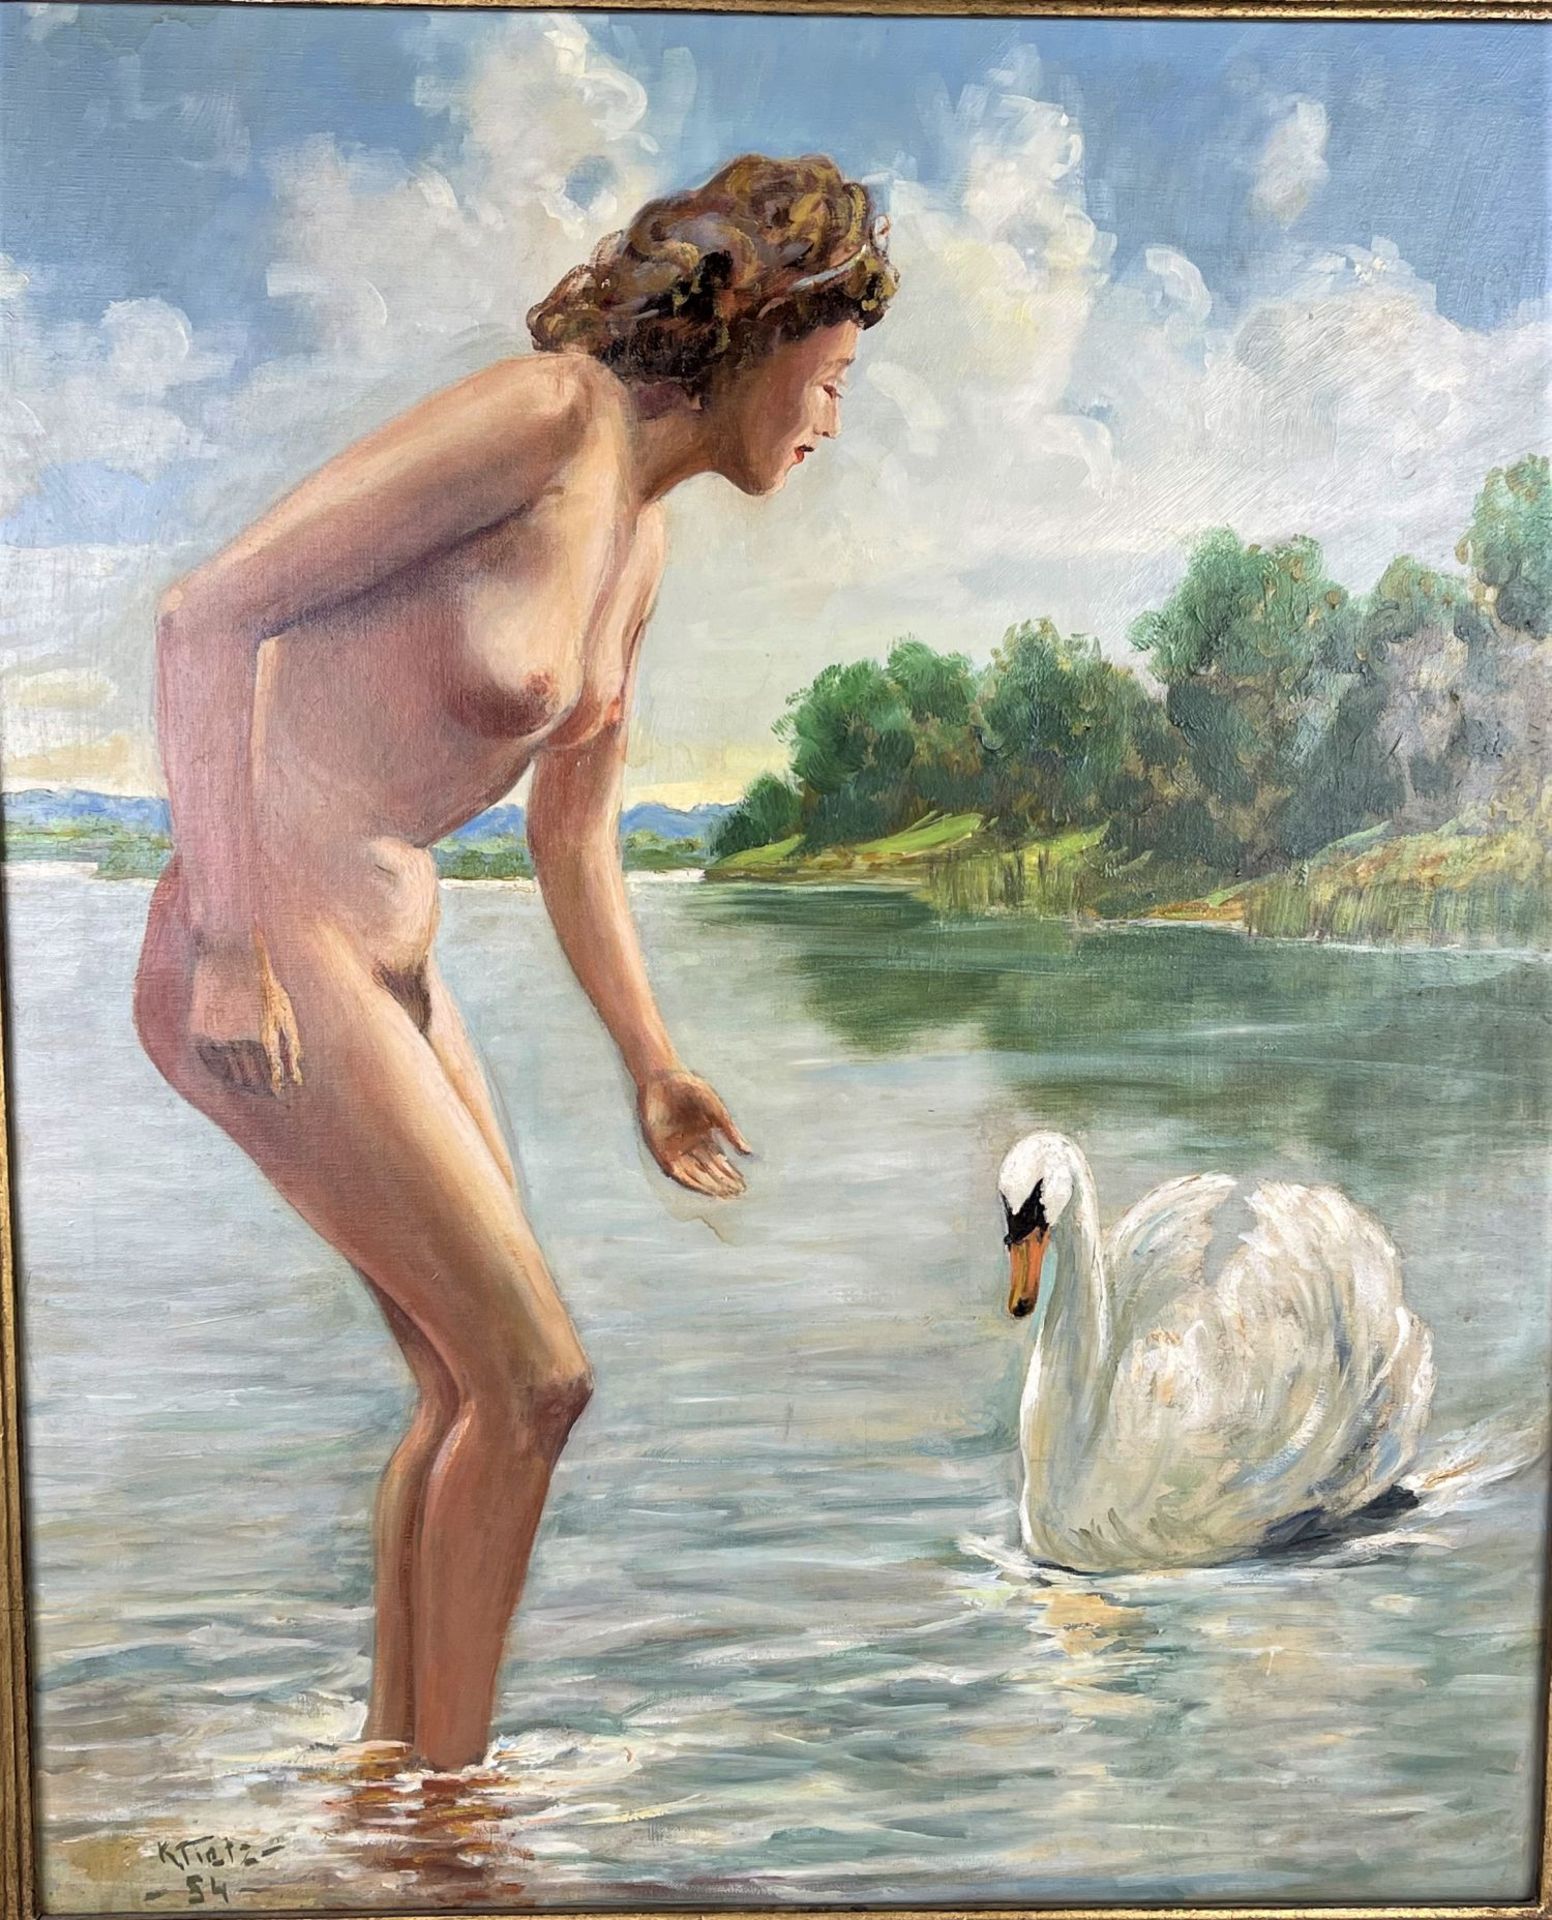 Oil painting "Bathers with swan", 1954 - Image 2 of 6